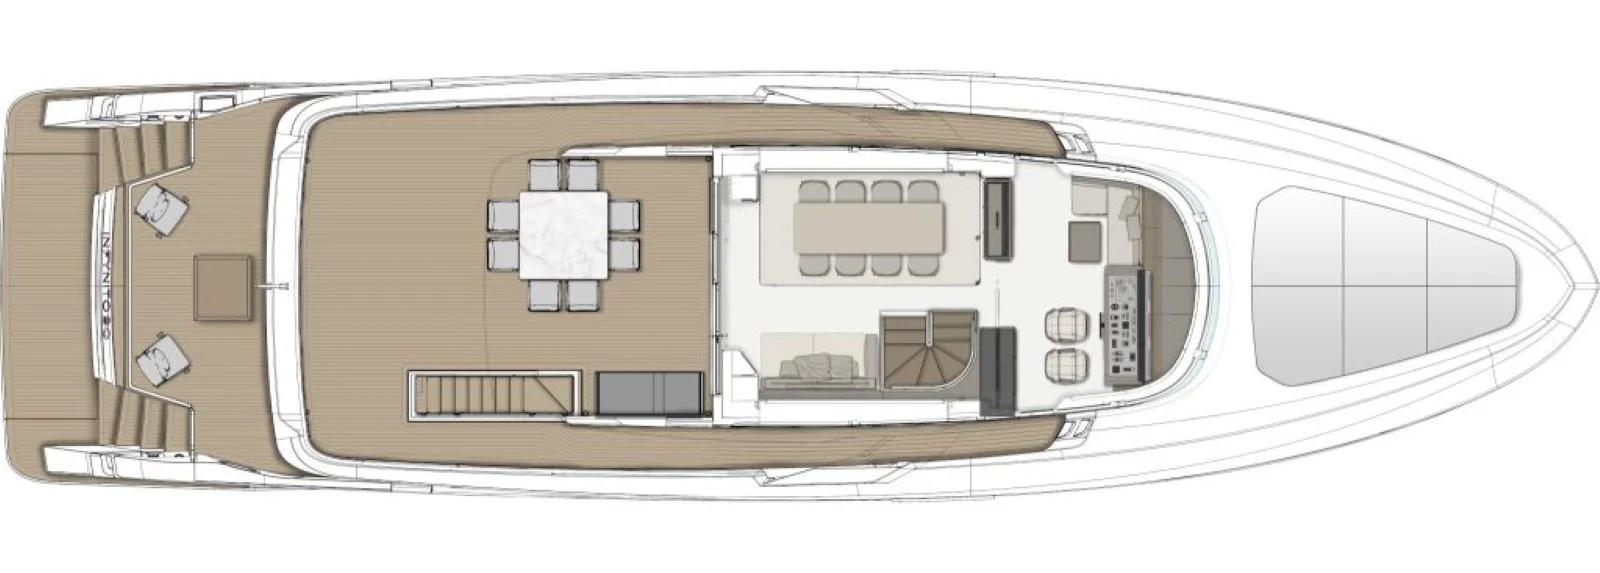 Upper deck with optional dining area